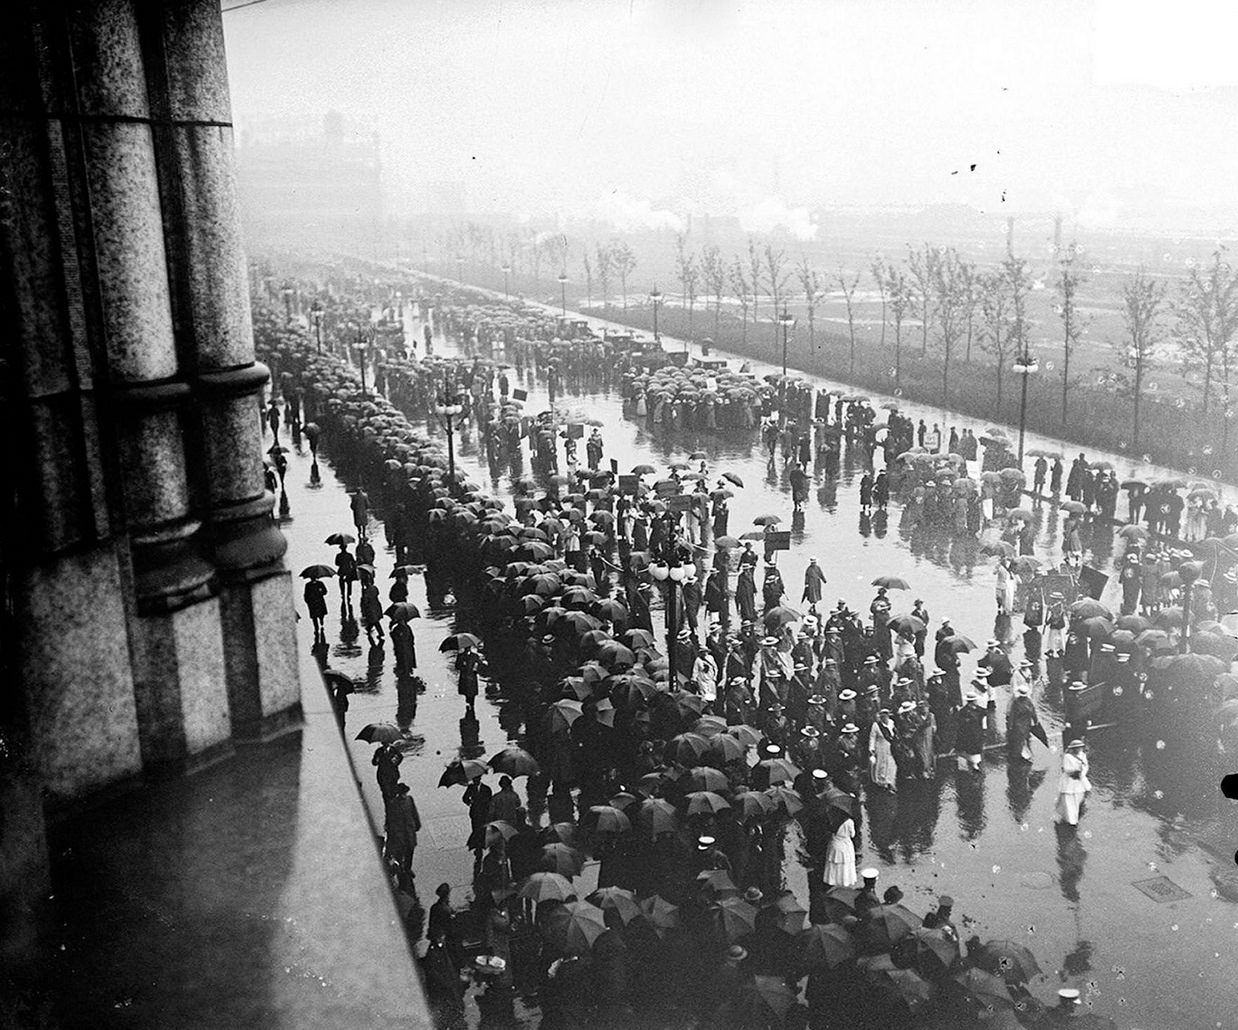 The suffrage parade, with spectators looking on in the rain, on South Michigan Avenue across from Grant Park in the Loop community area of Chicago, Illinois, 1910s.